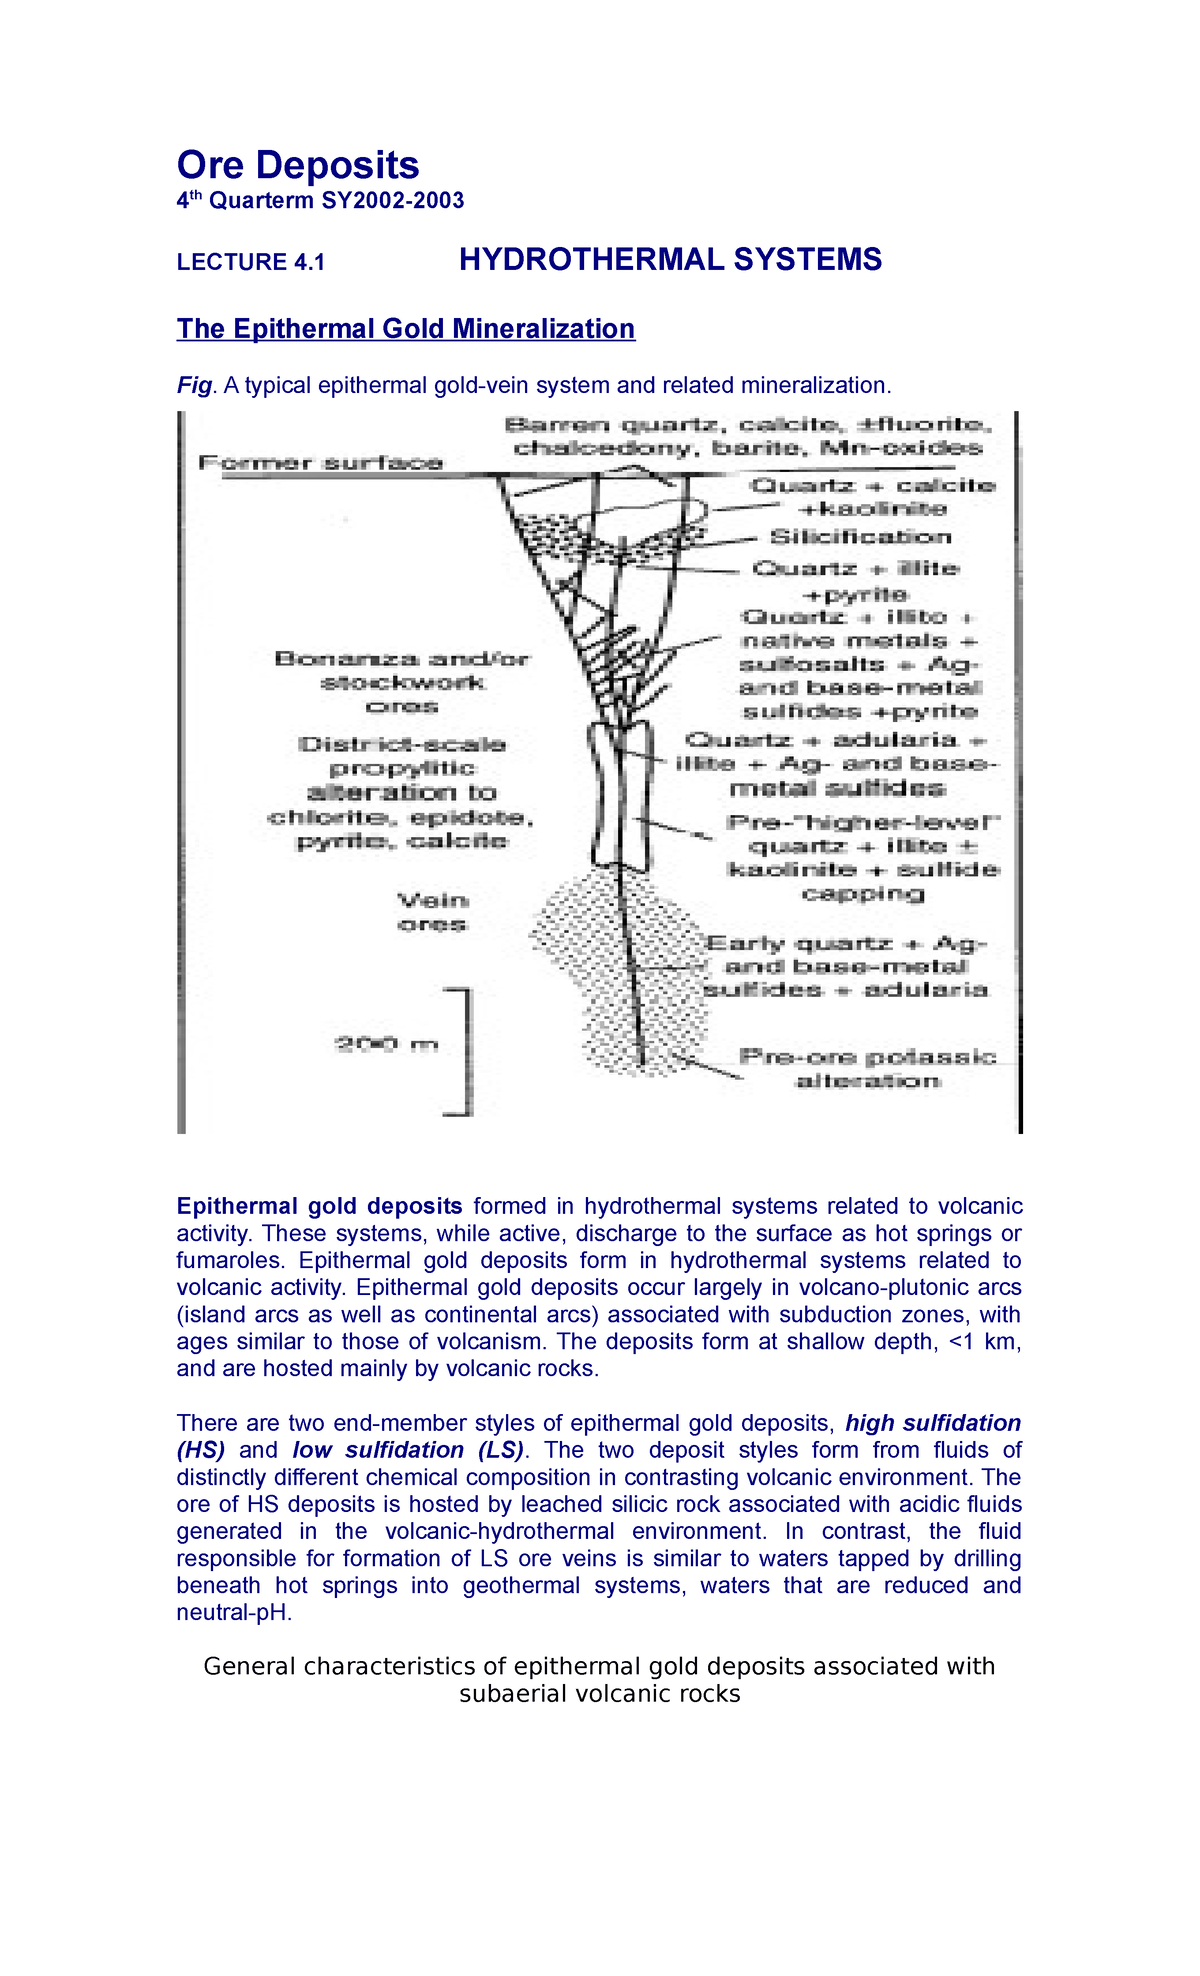 Hydrothermal Systems - notes - Ore Deposits 4 th Quarterm SY2002 ...